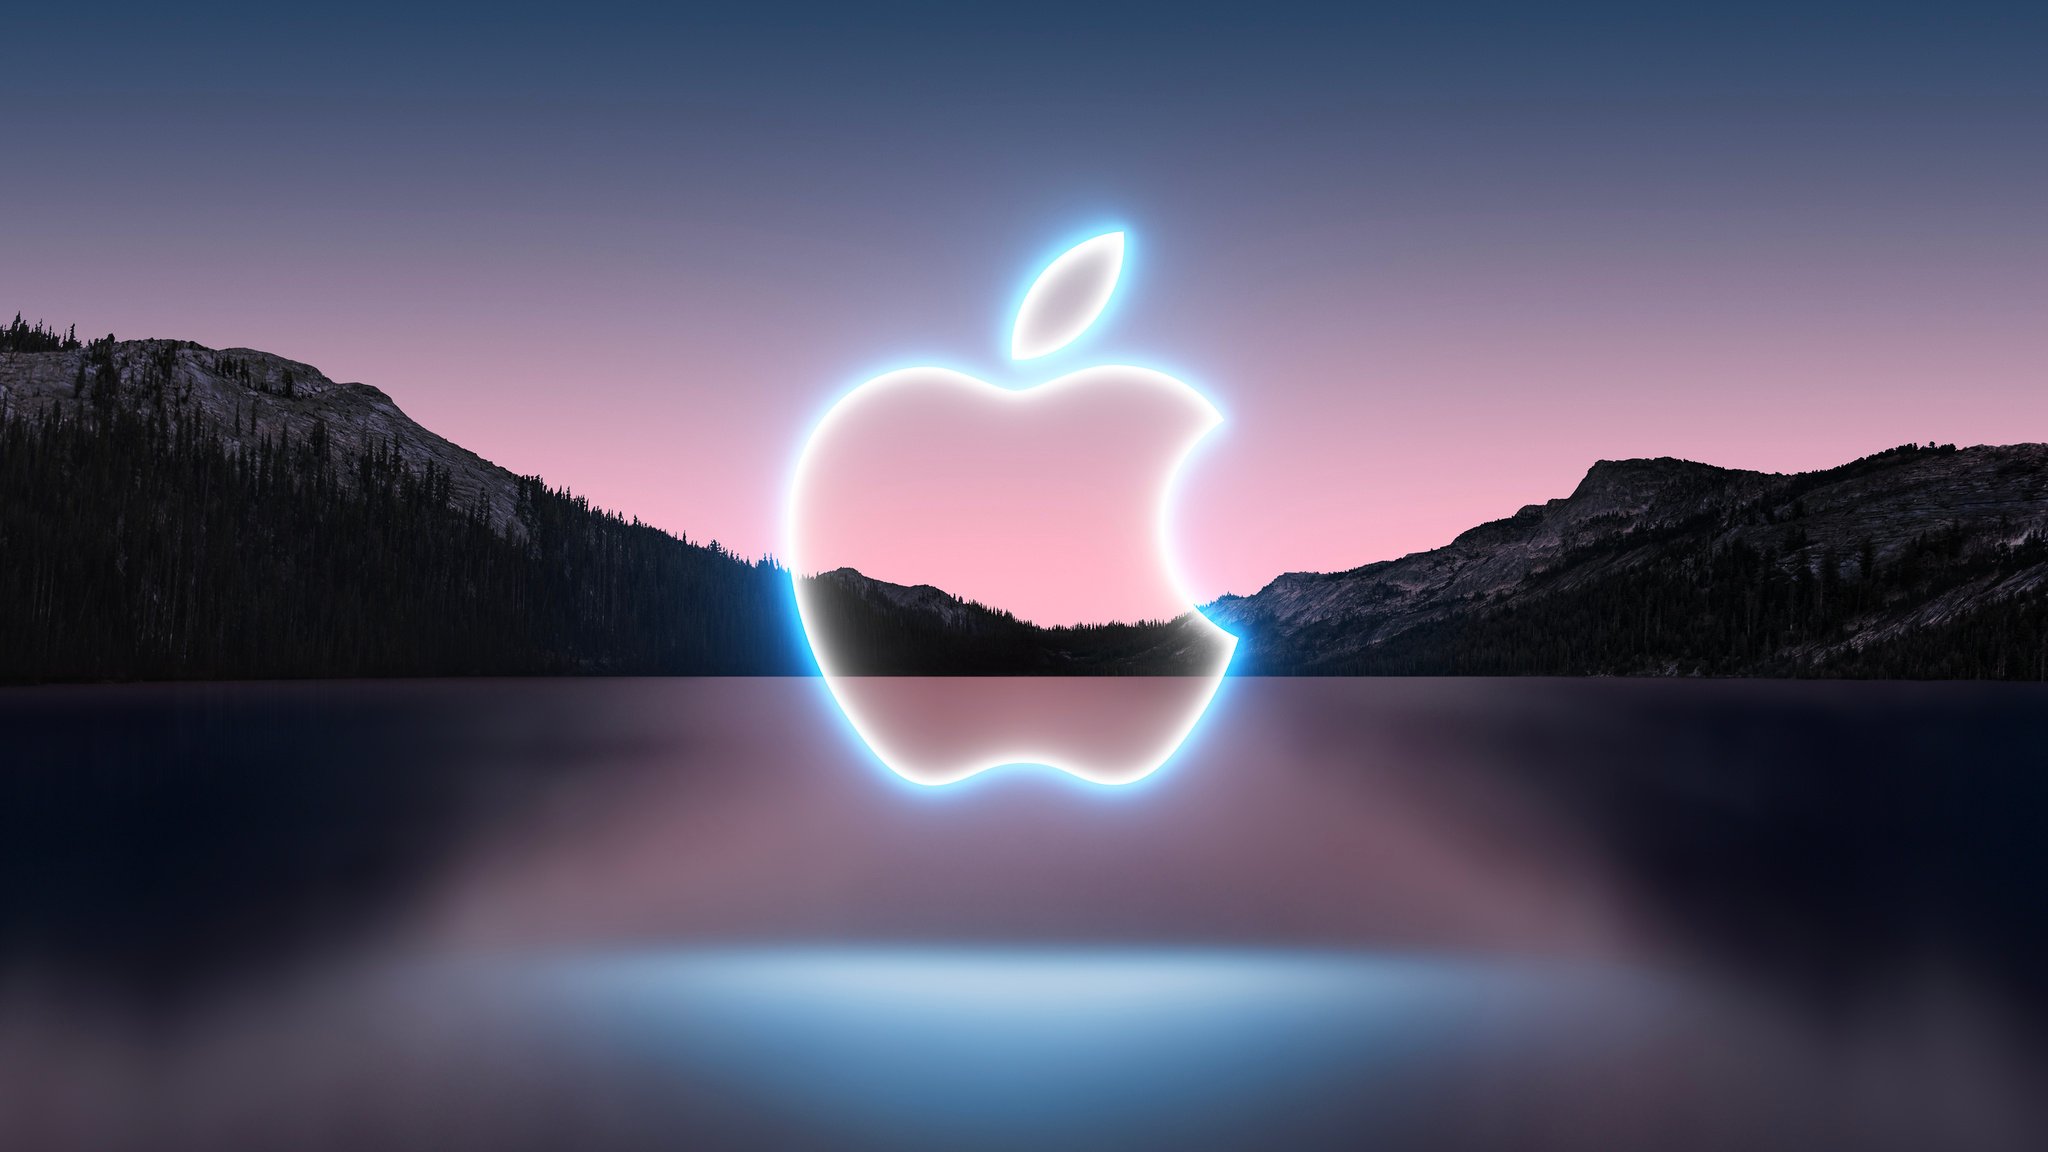 Download iPhone 13 'California Streaming' Event Wallpaper Right Here